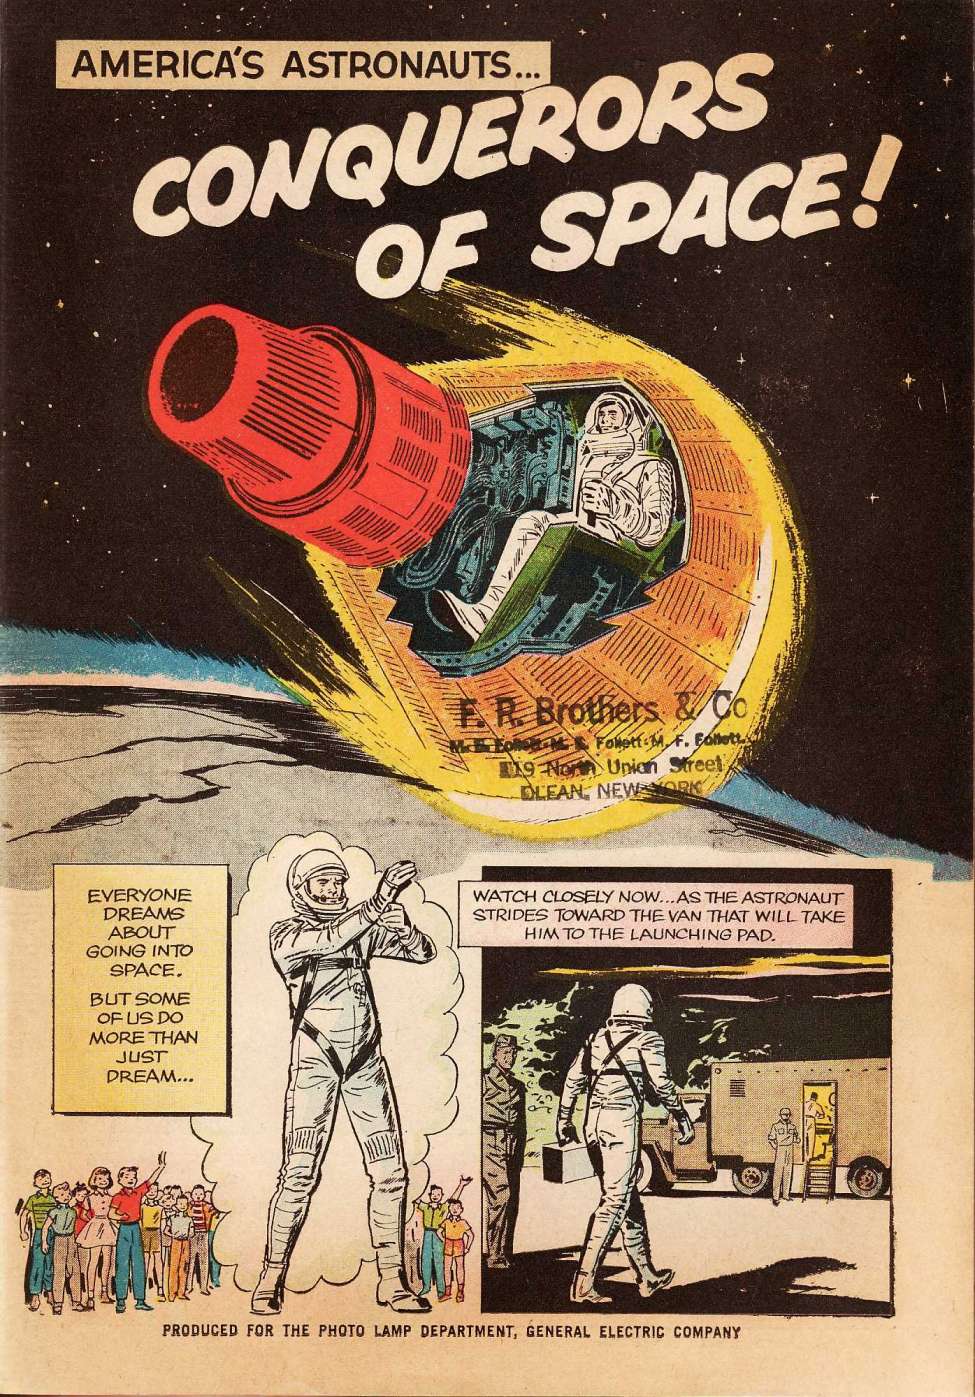 Book Cover For Conquerors of Space